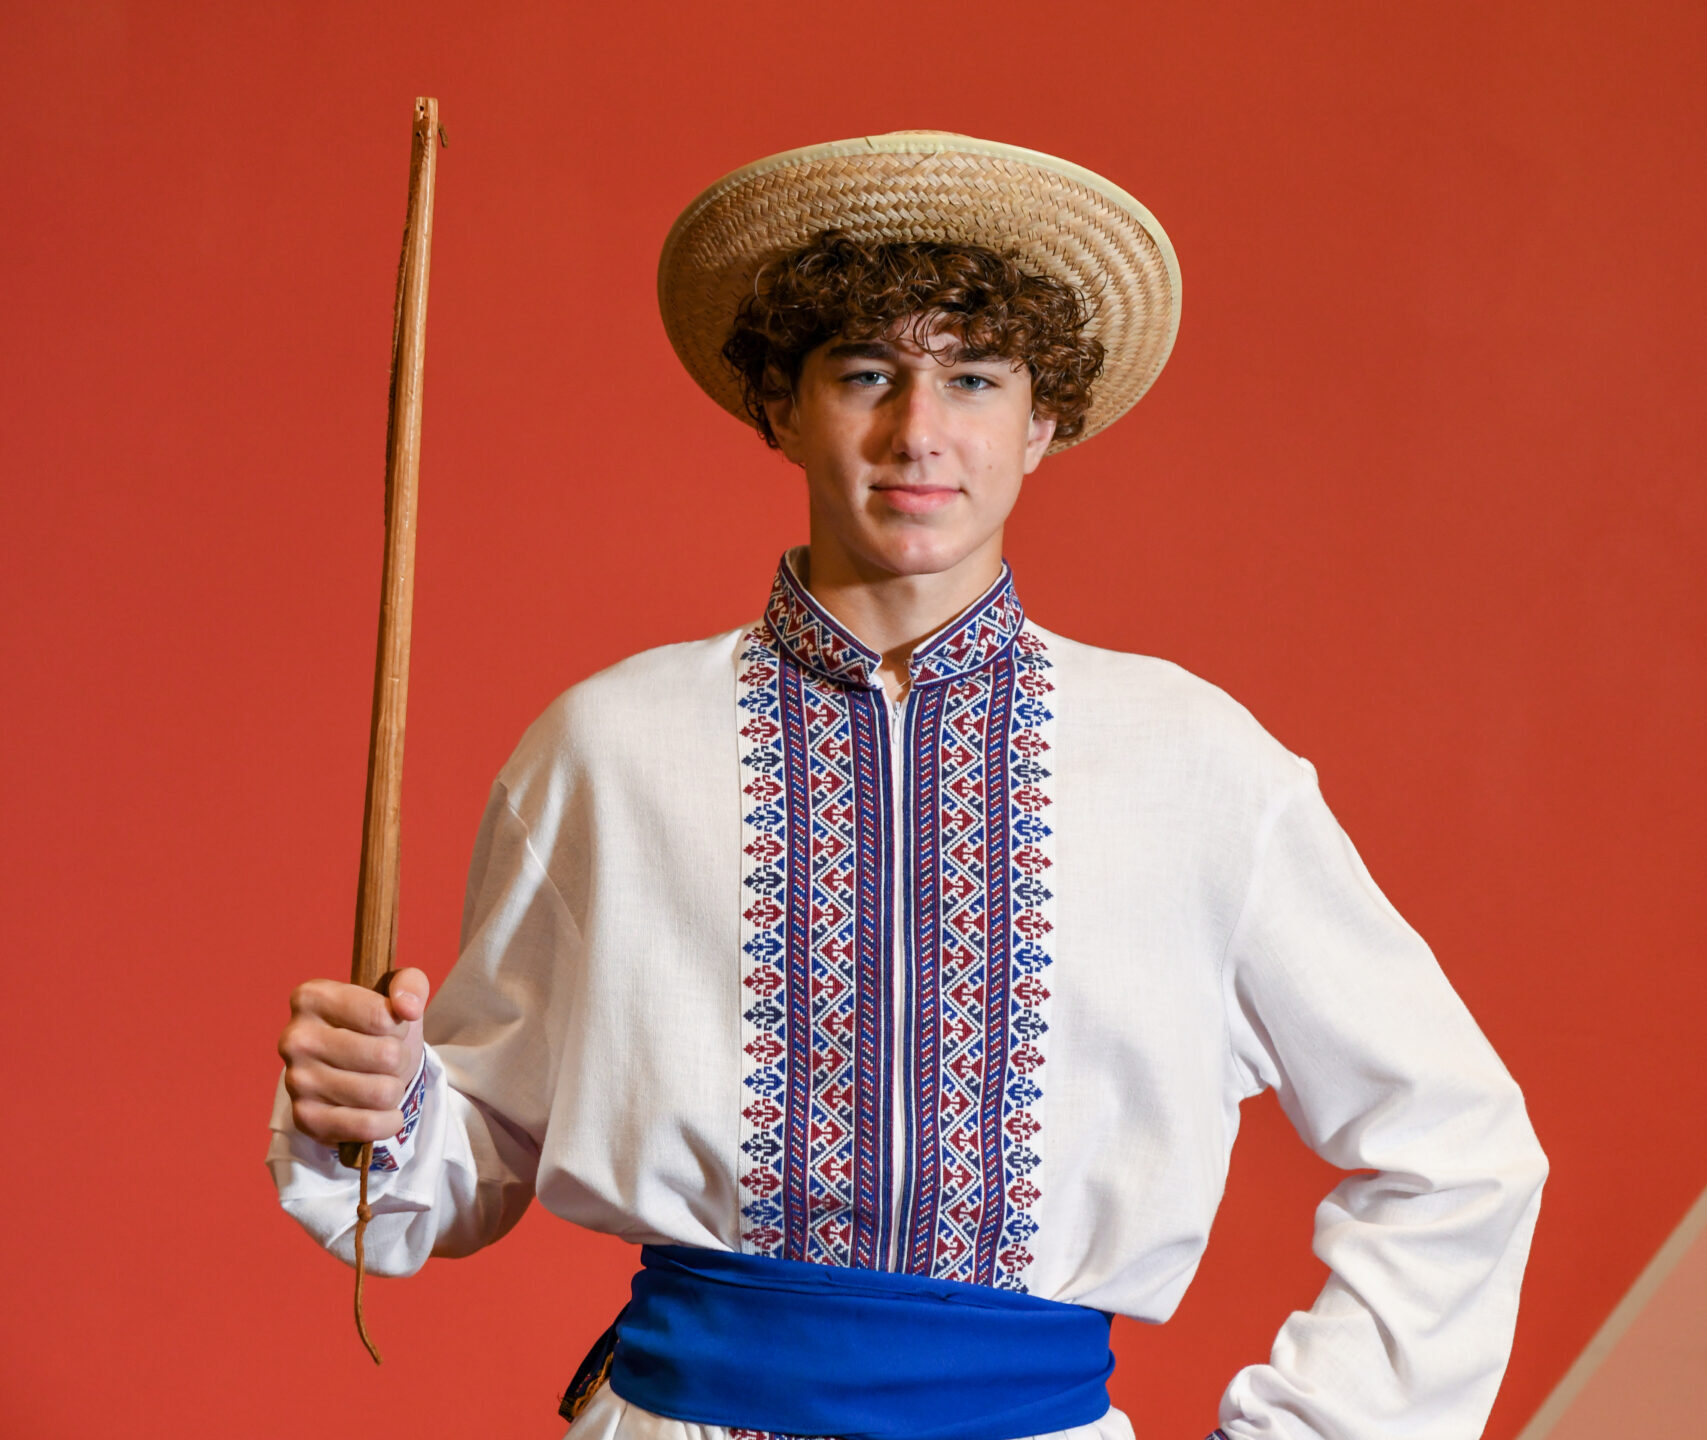 a young male dancer wears a straw hat, a blue embroidered shirt, and a blue sash.